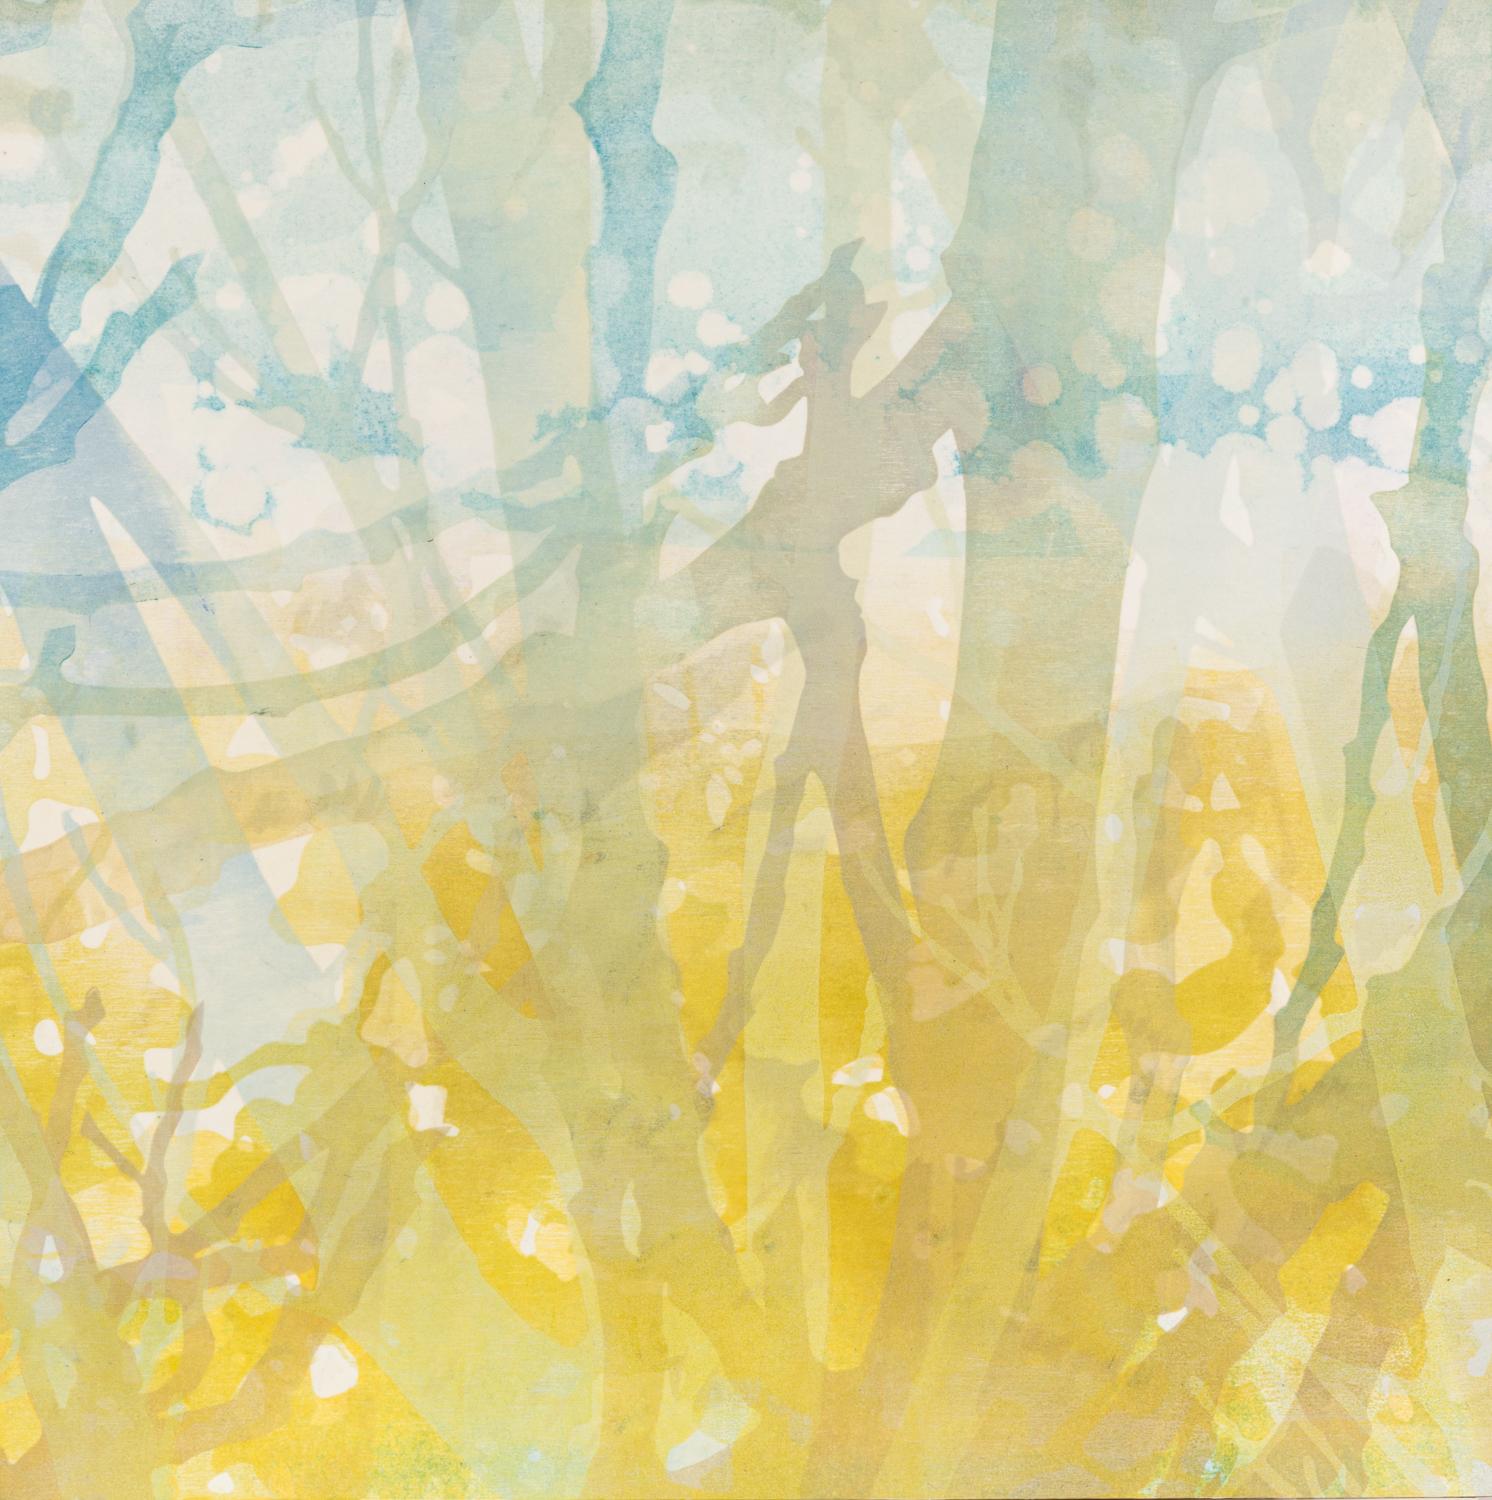 Katherine Warinner Landscape Print - "Thicket 1" - Multi-layered Abstract Branches and Foliage in Yellow Gray Blue